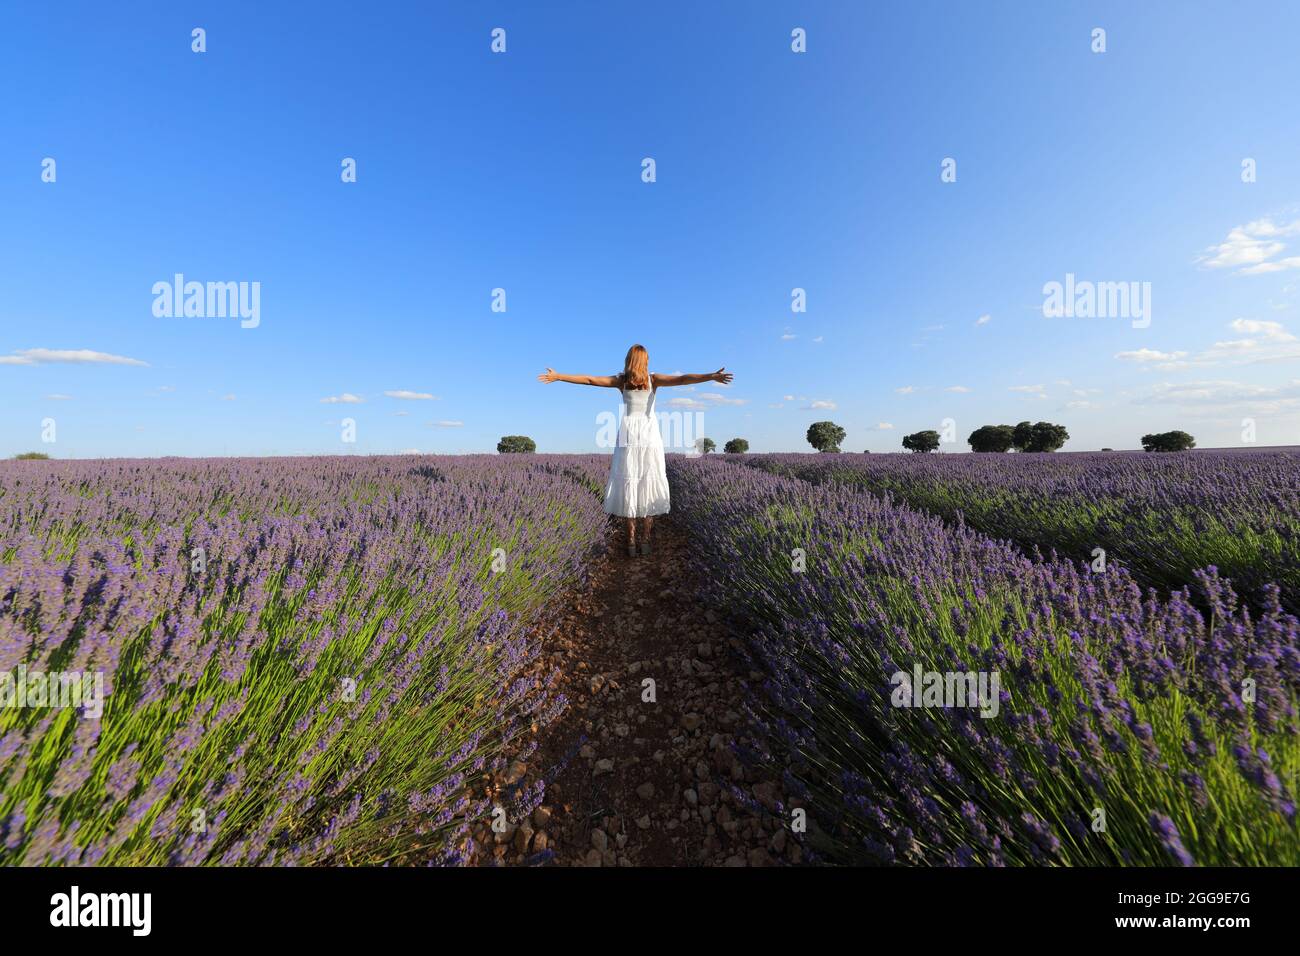 Woman wearing white dress celebrating outstretching arms in a lavender field Stock Photo